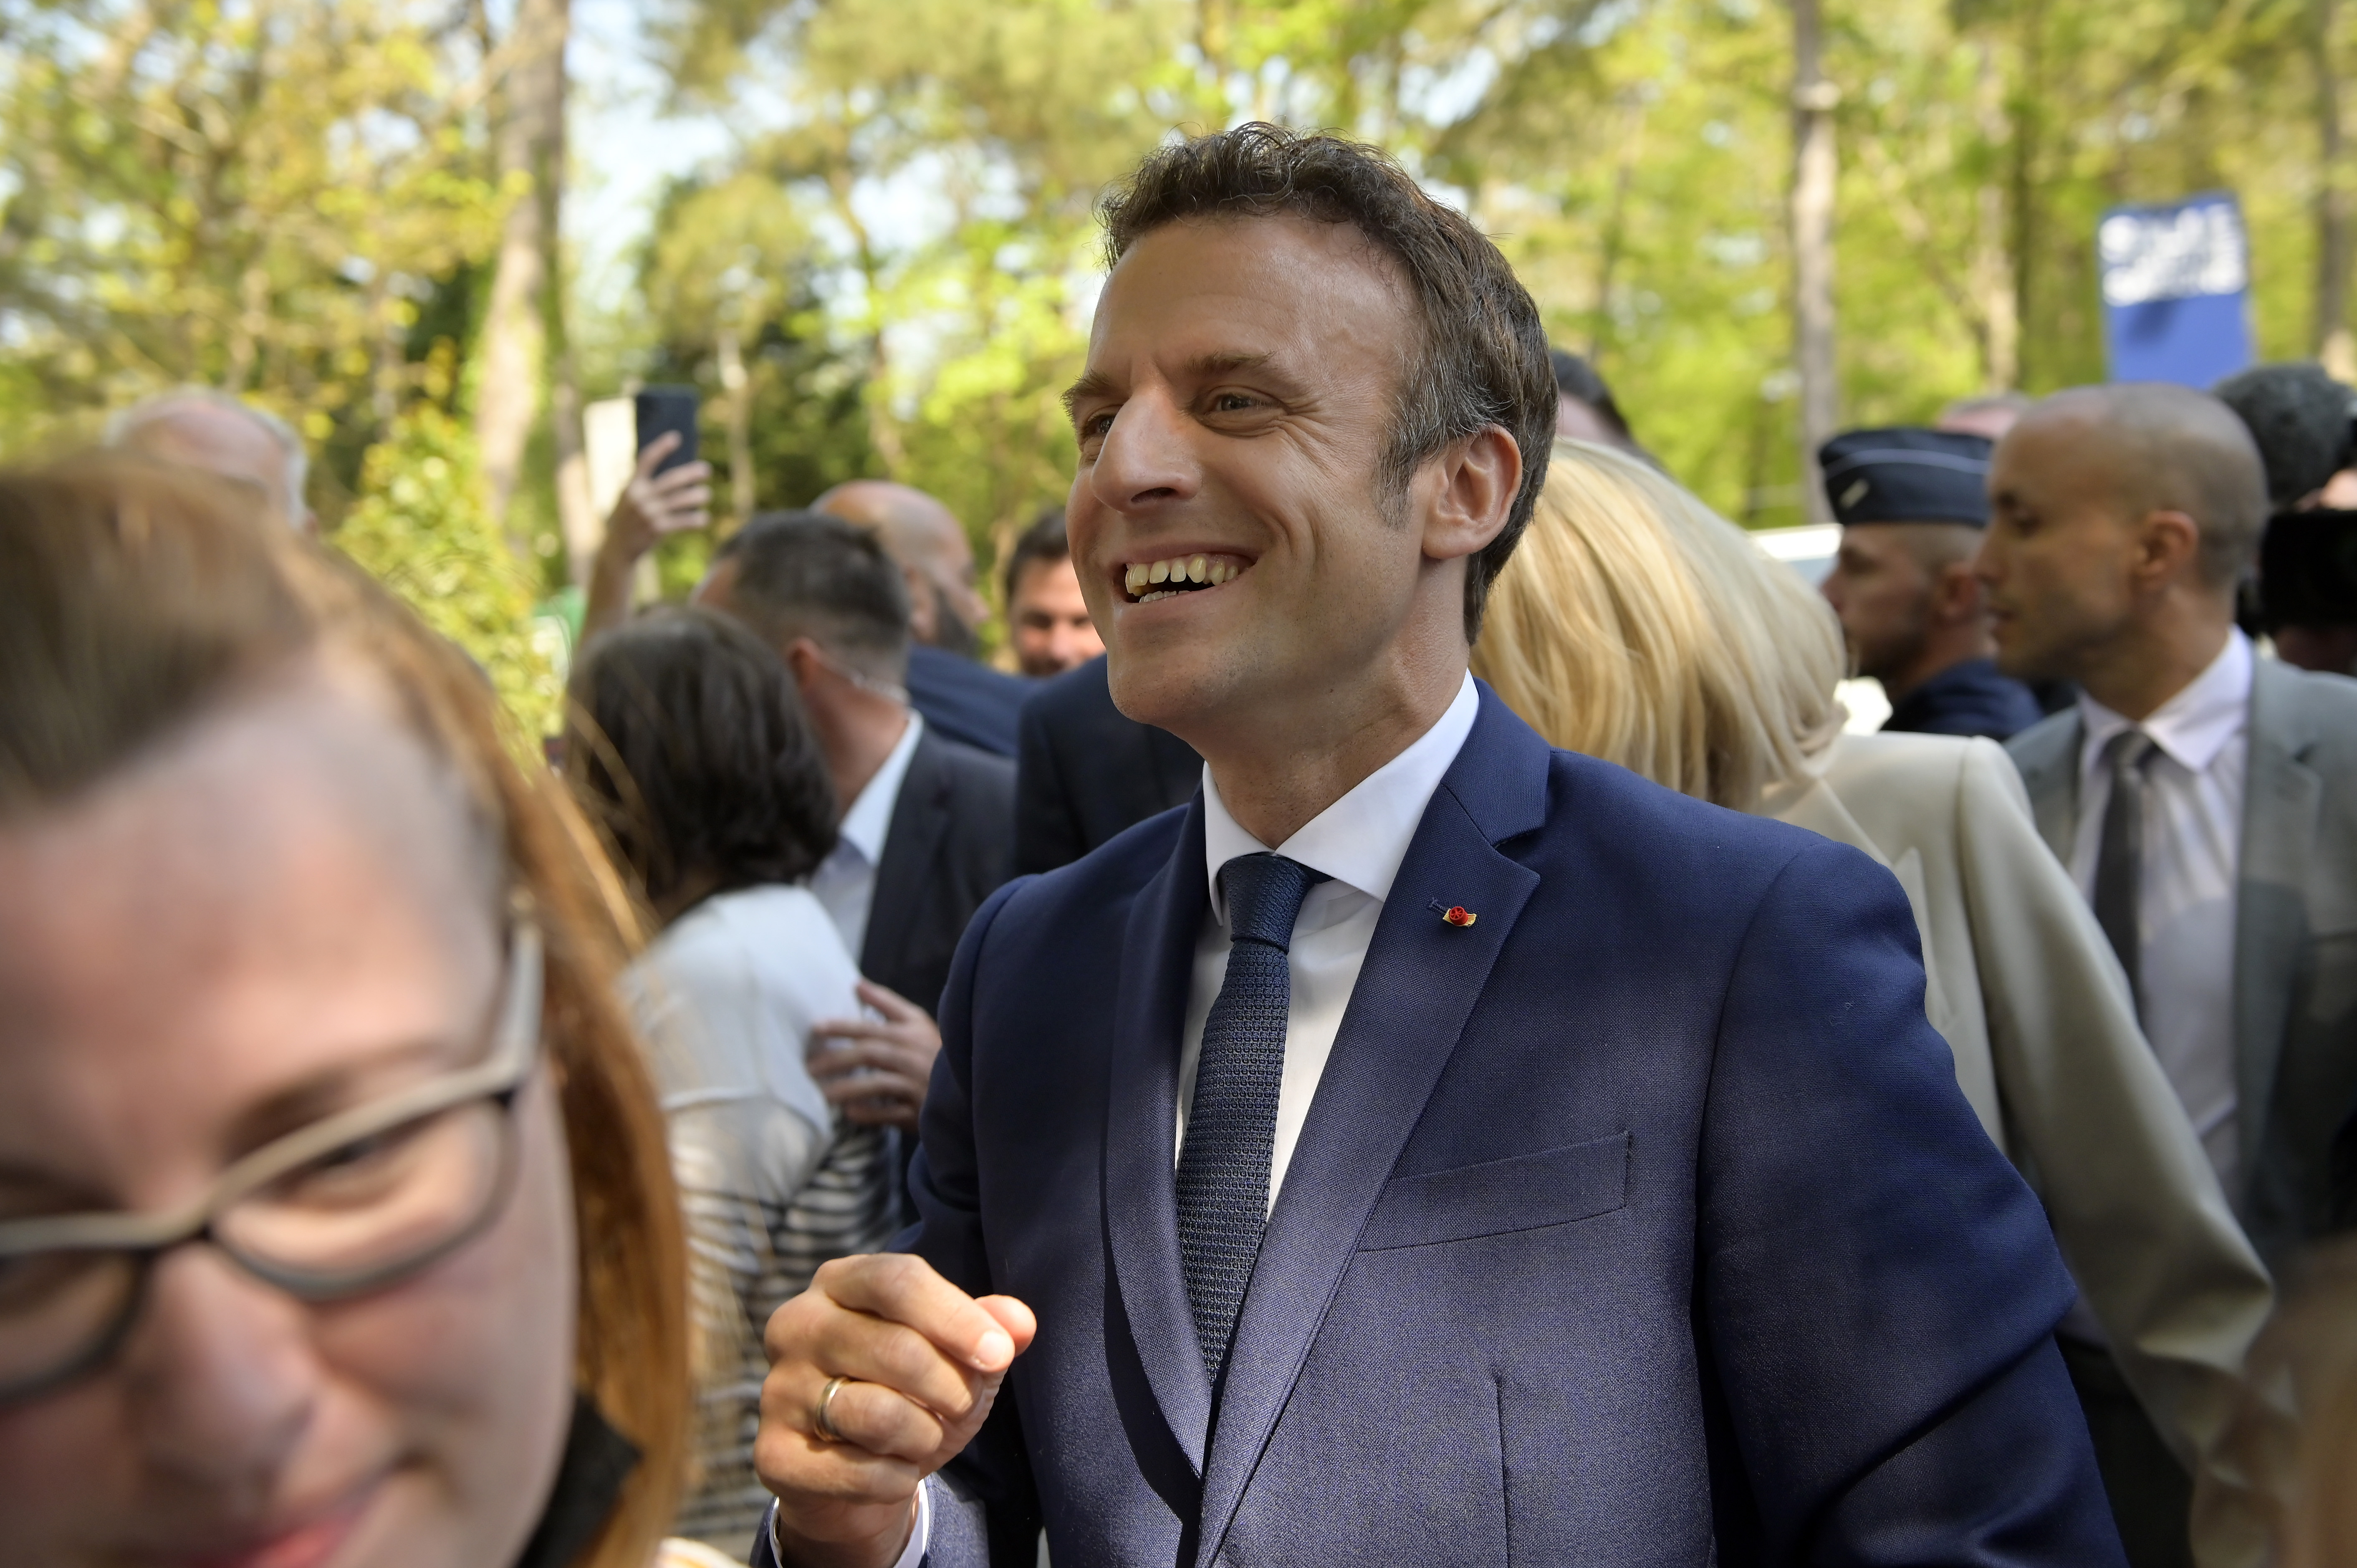 Macron set to clinch second term in France, Defeating Le Pen